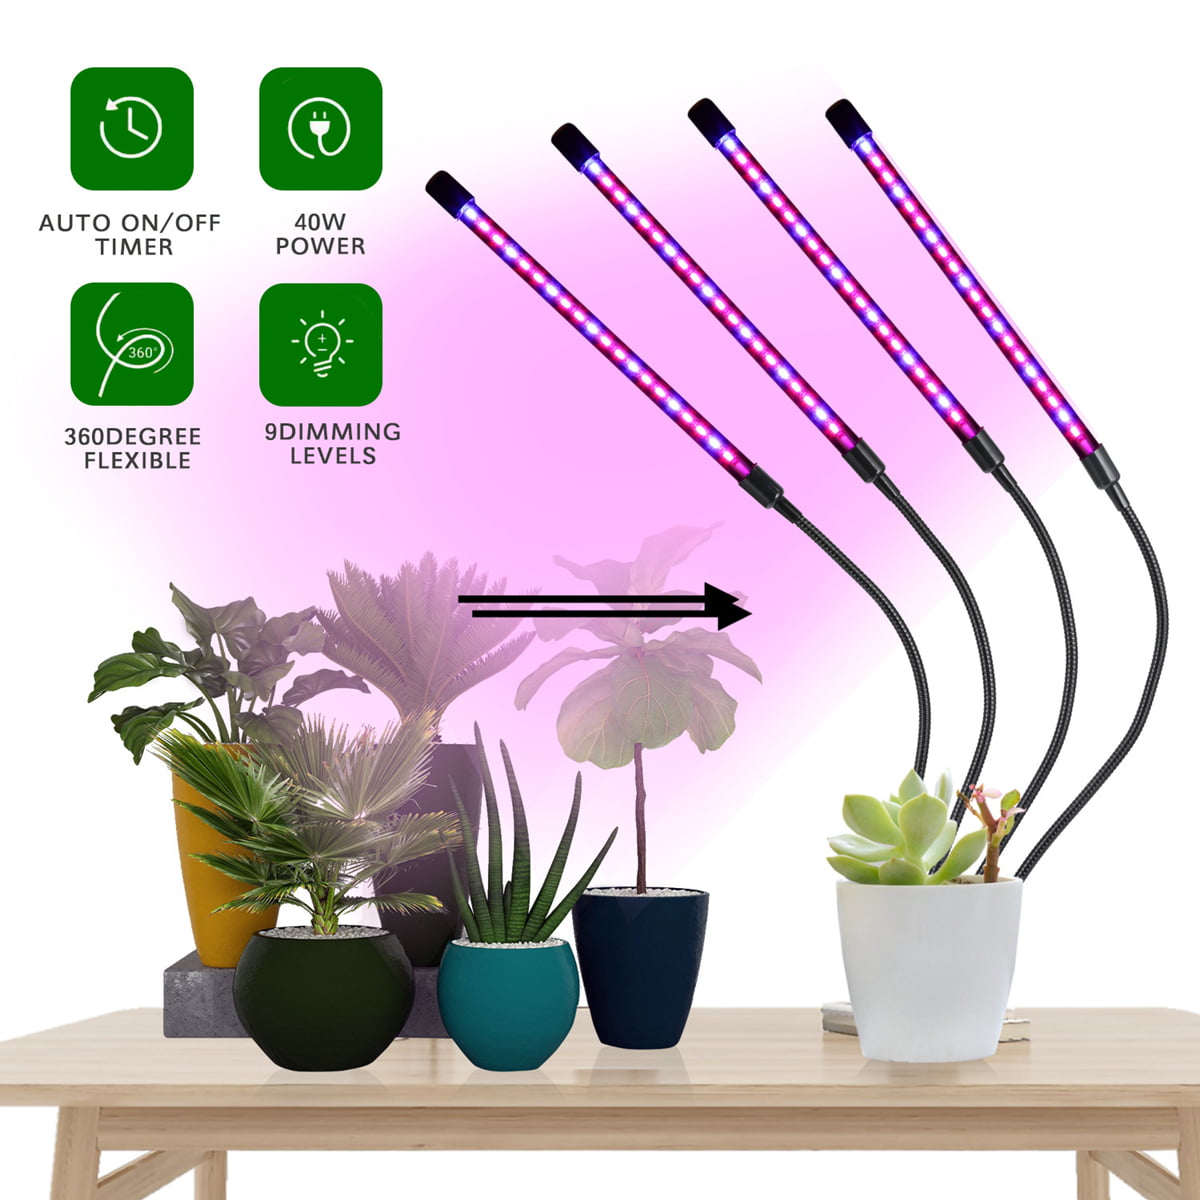 Portable USB Power LED Grow Light for Indoor Hydroponics Plant Growing Lamp 